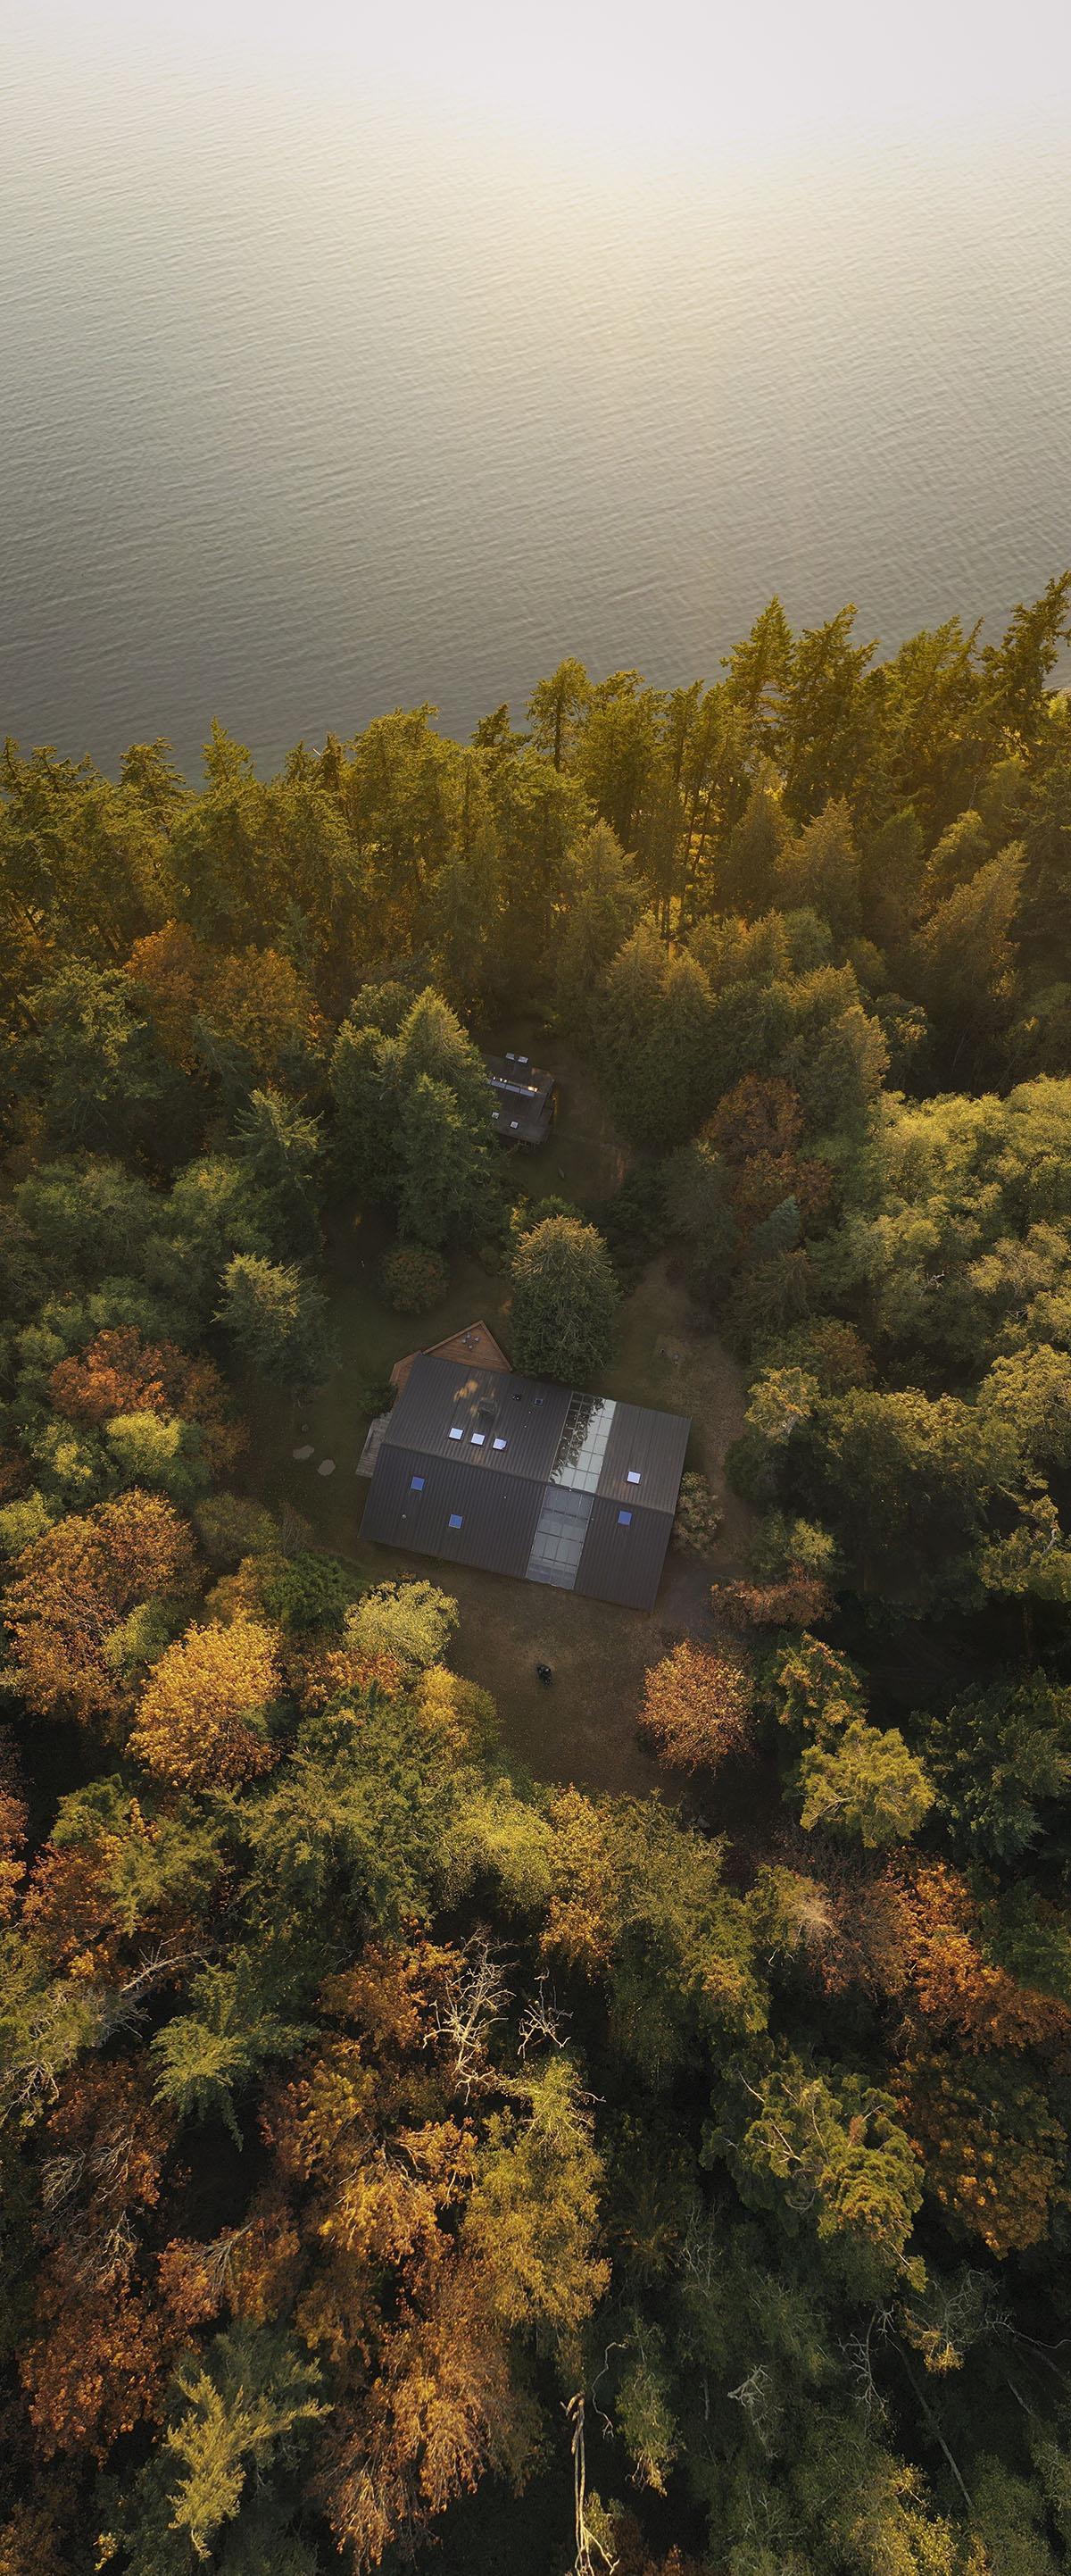 arial view of a small building surrounded by trees very close to a shining body of water